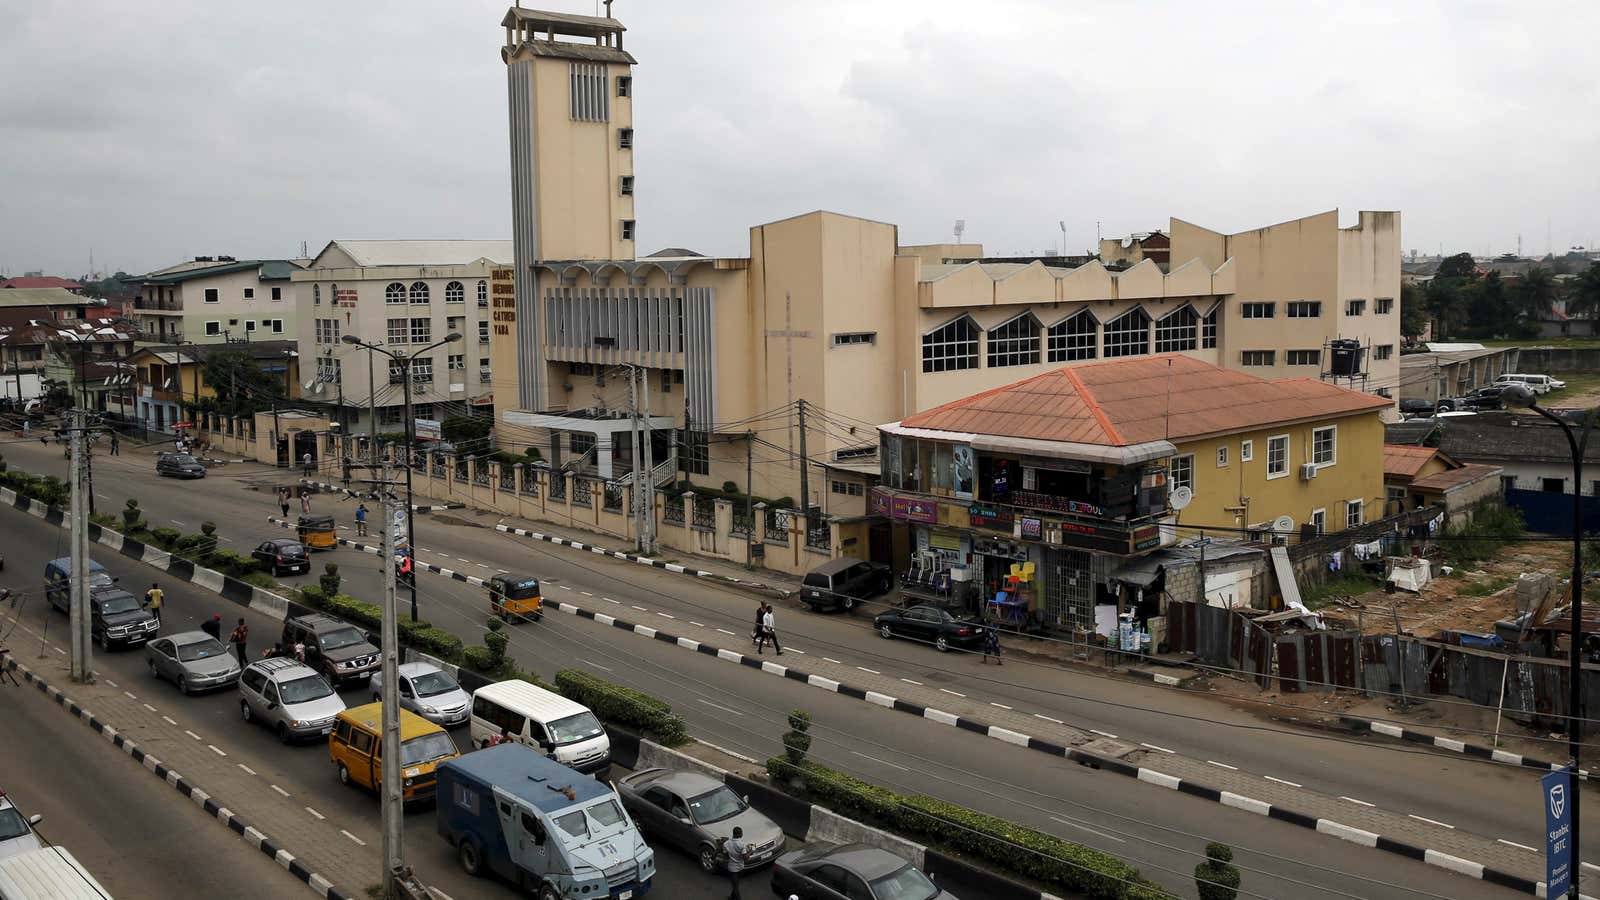 A view of the Yaba district in Lagos which has become the epicenter of Nigeria’s start-up sector.